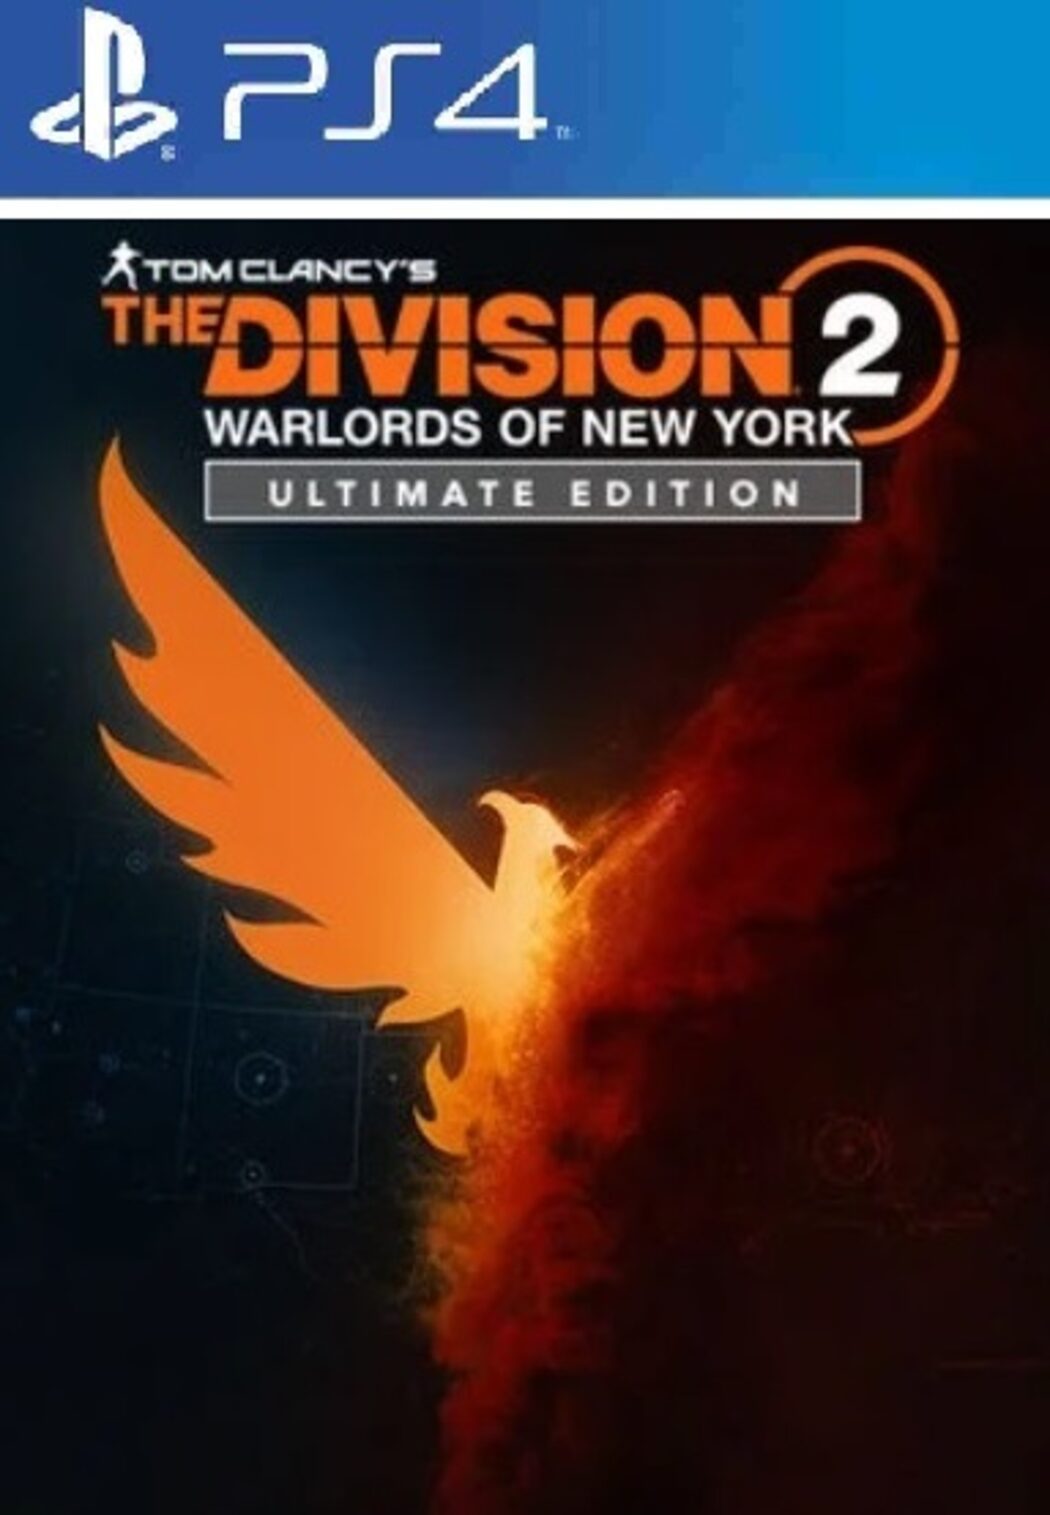 warlords of new york ps4 discount code